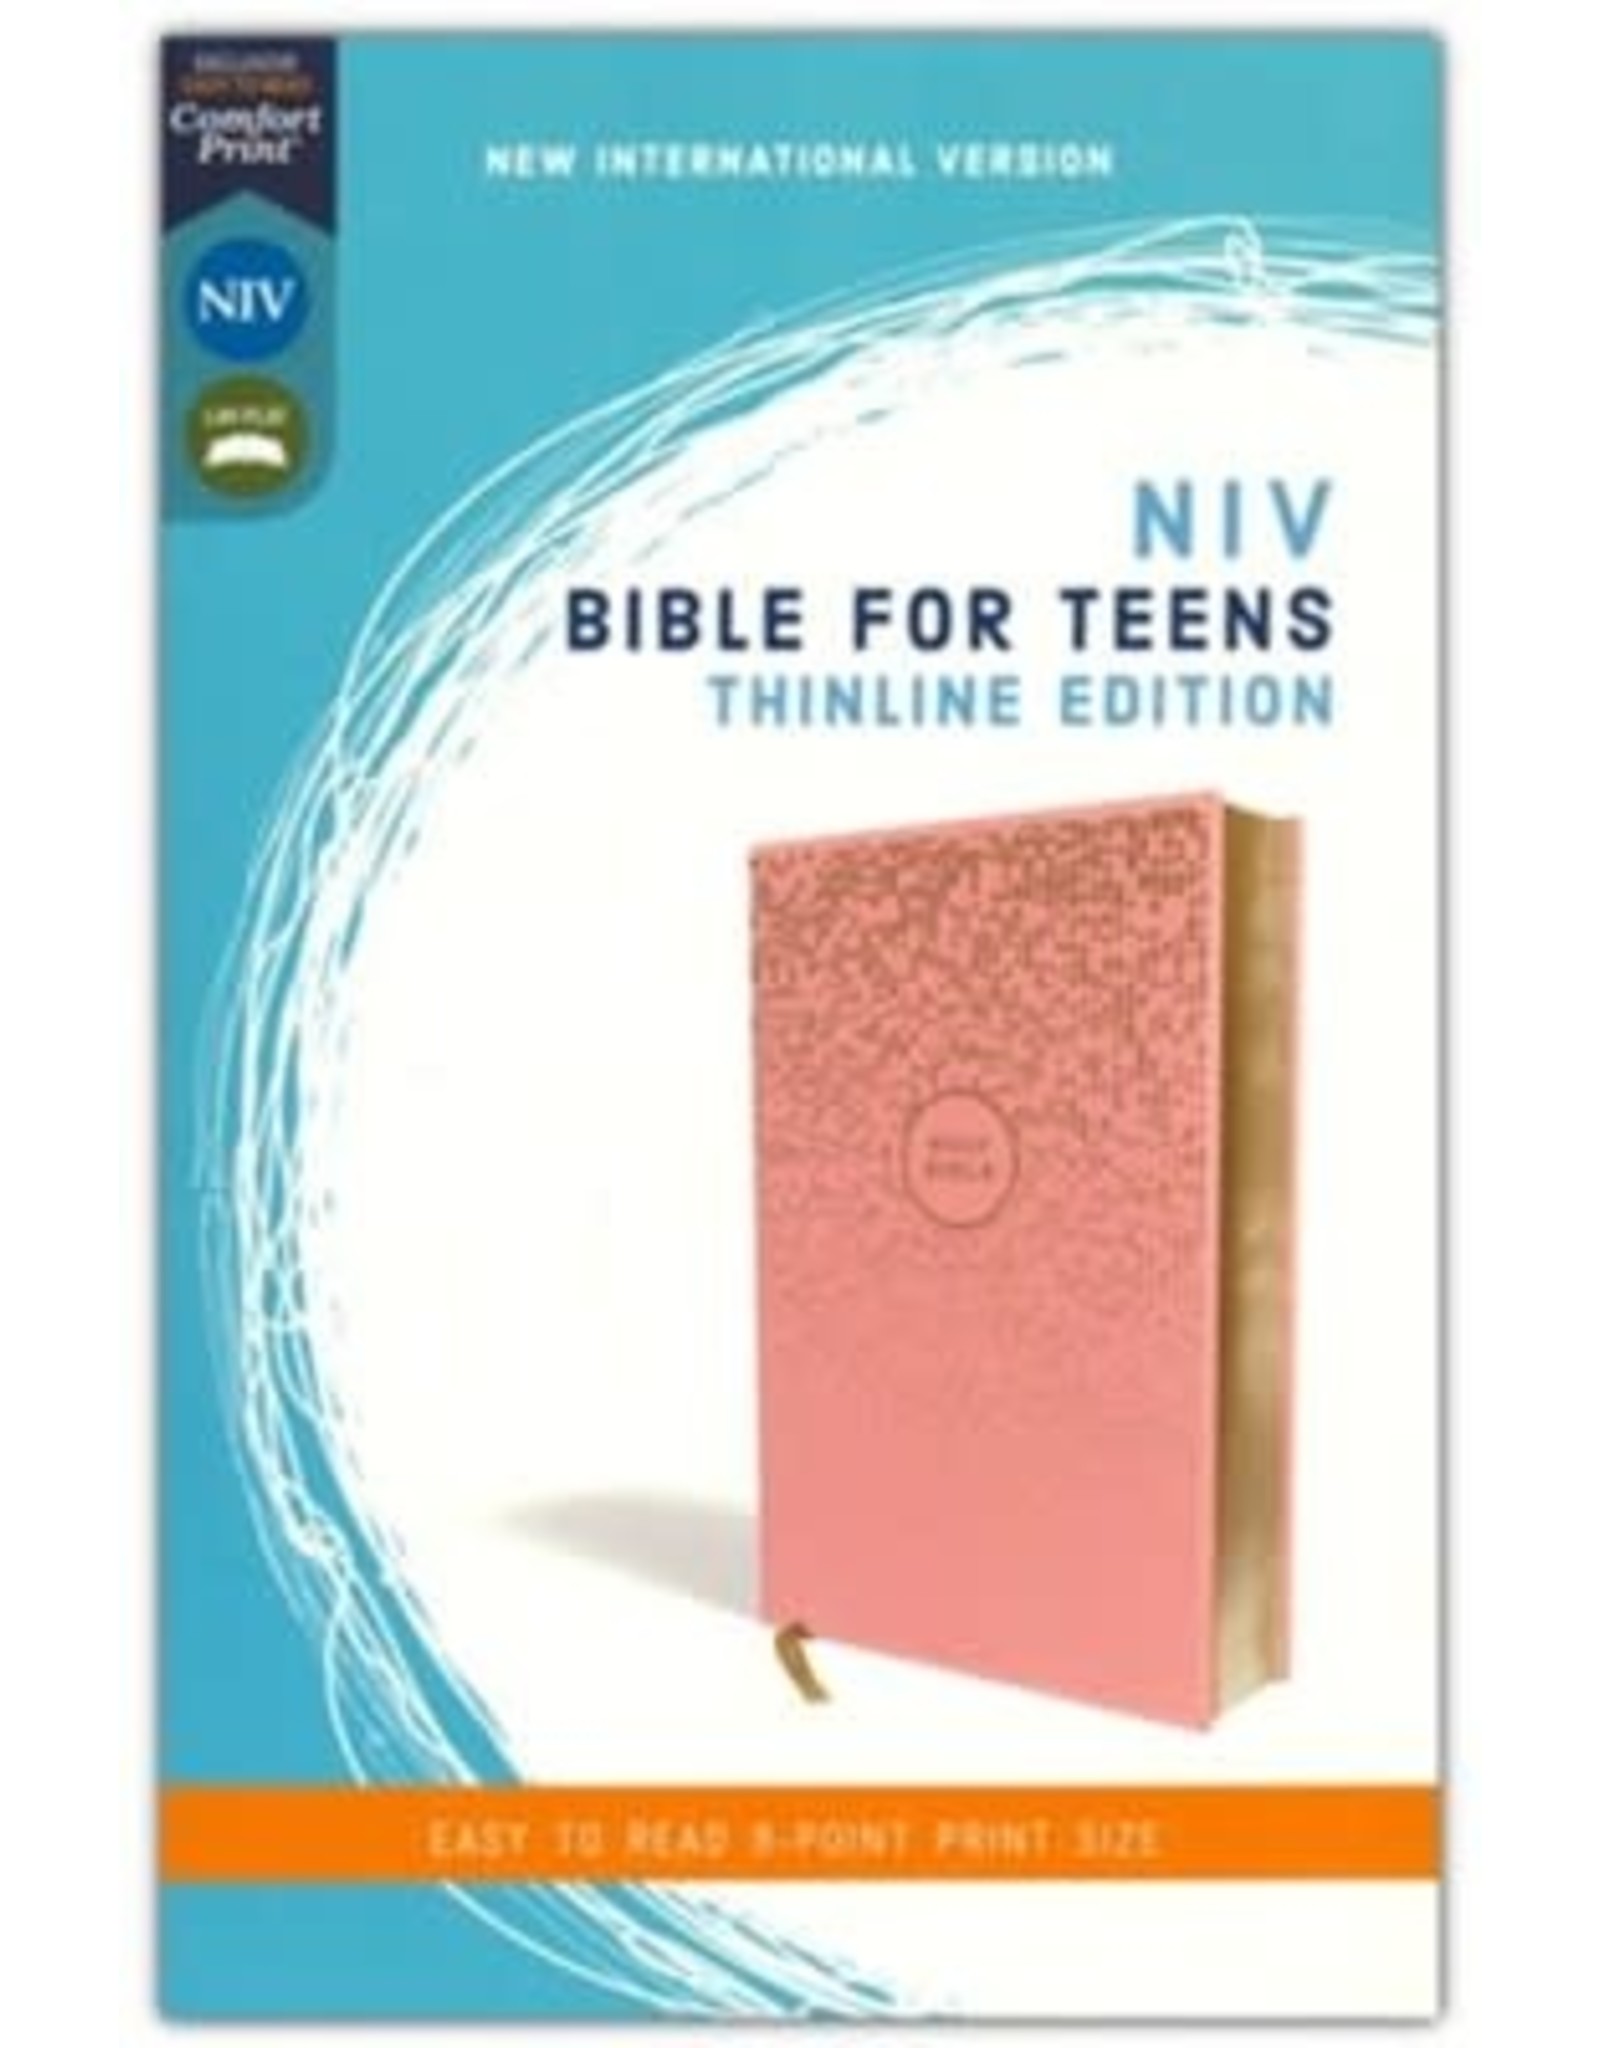 NIV Bible for Teens Thinline Edition